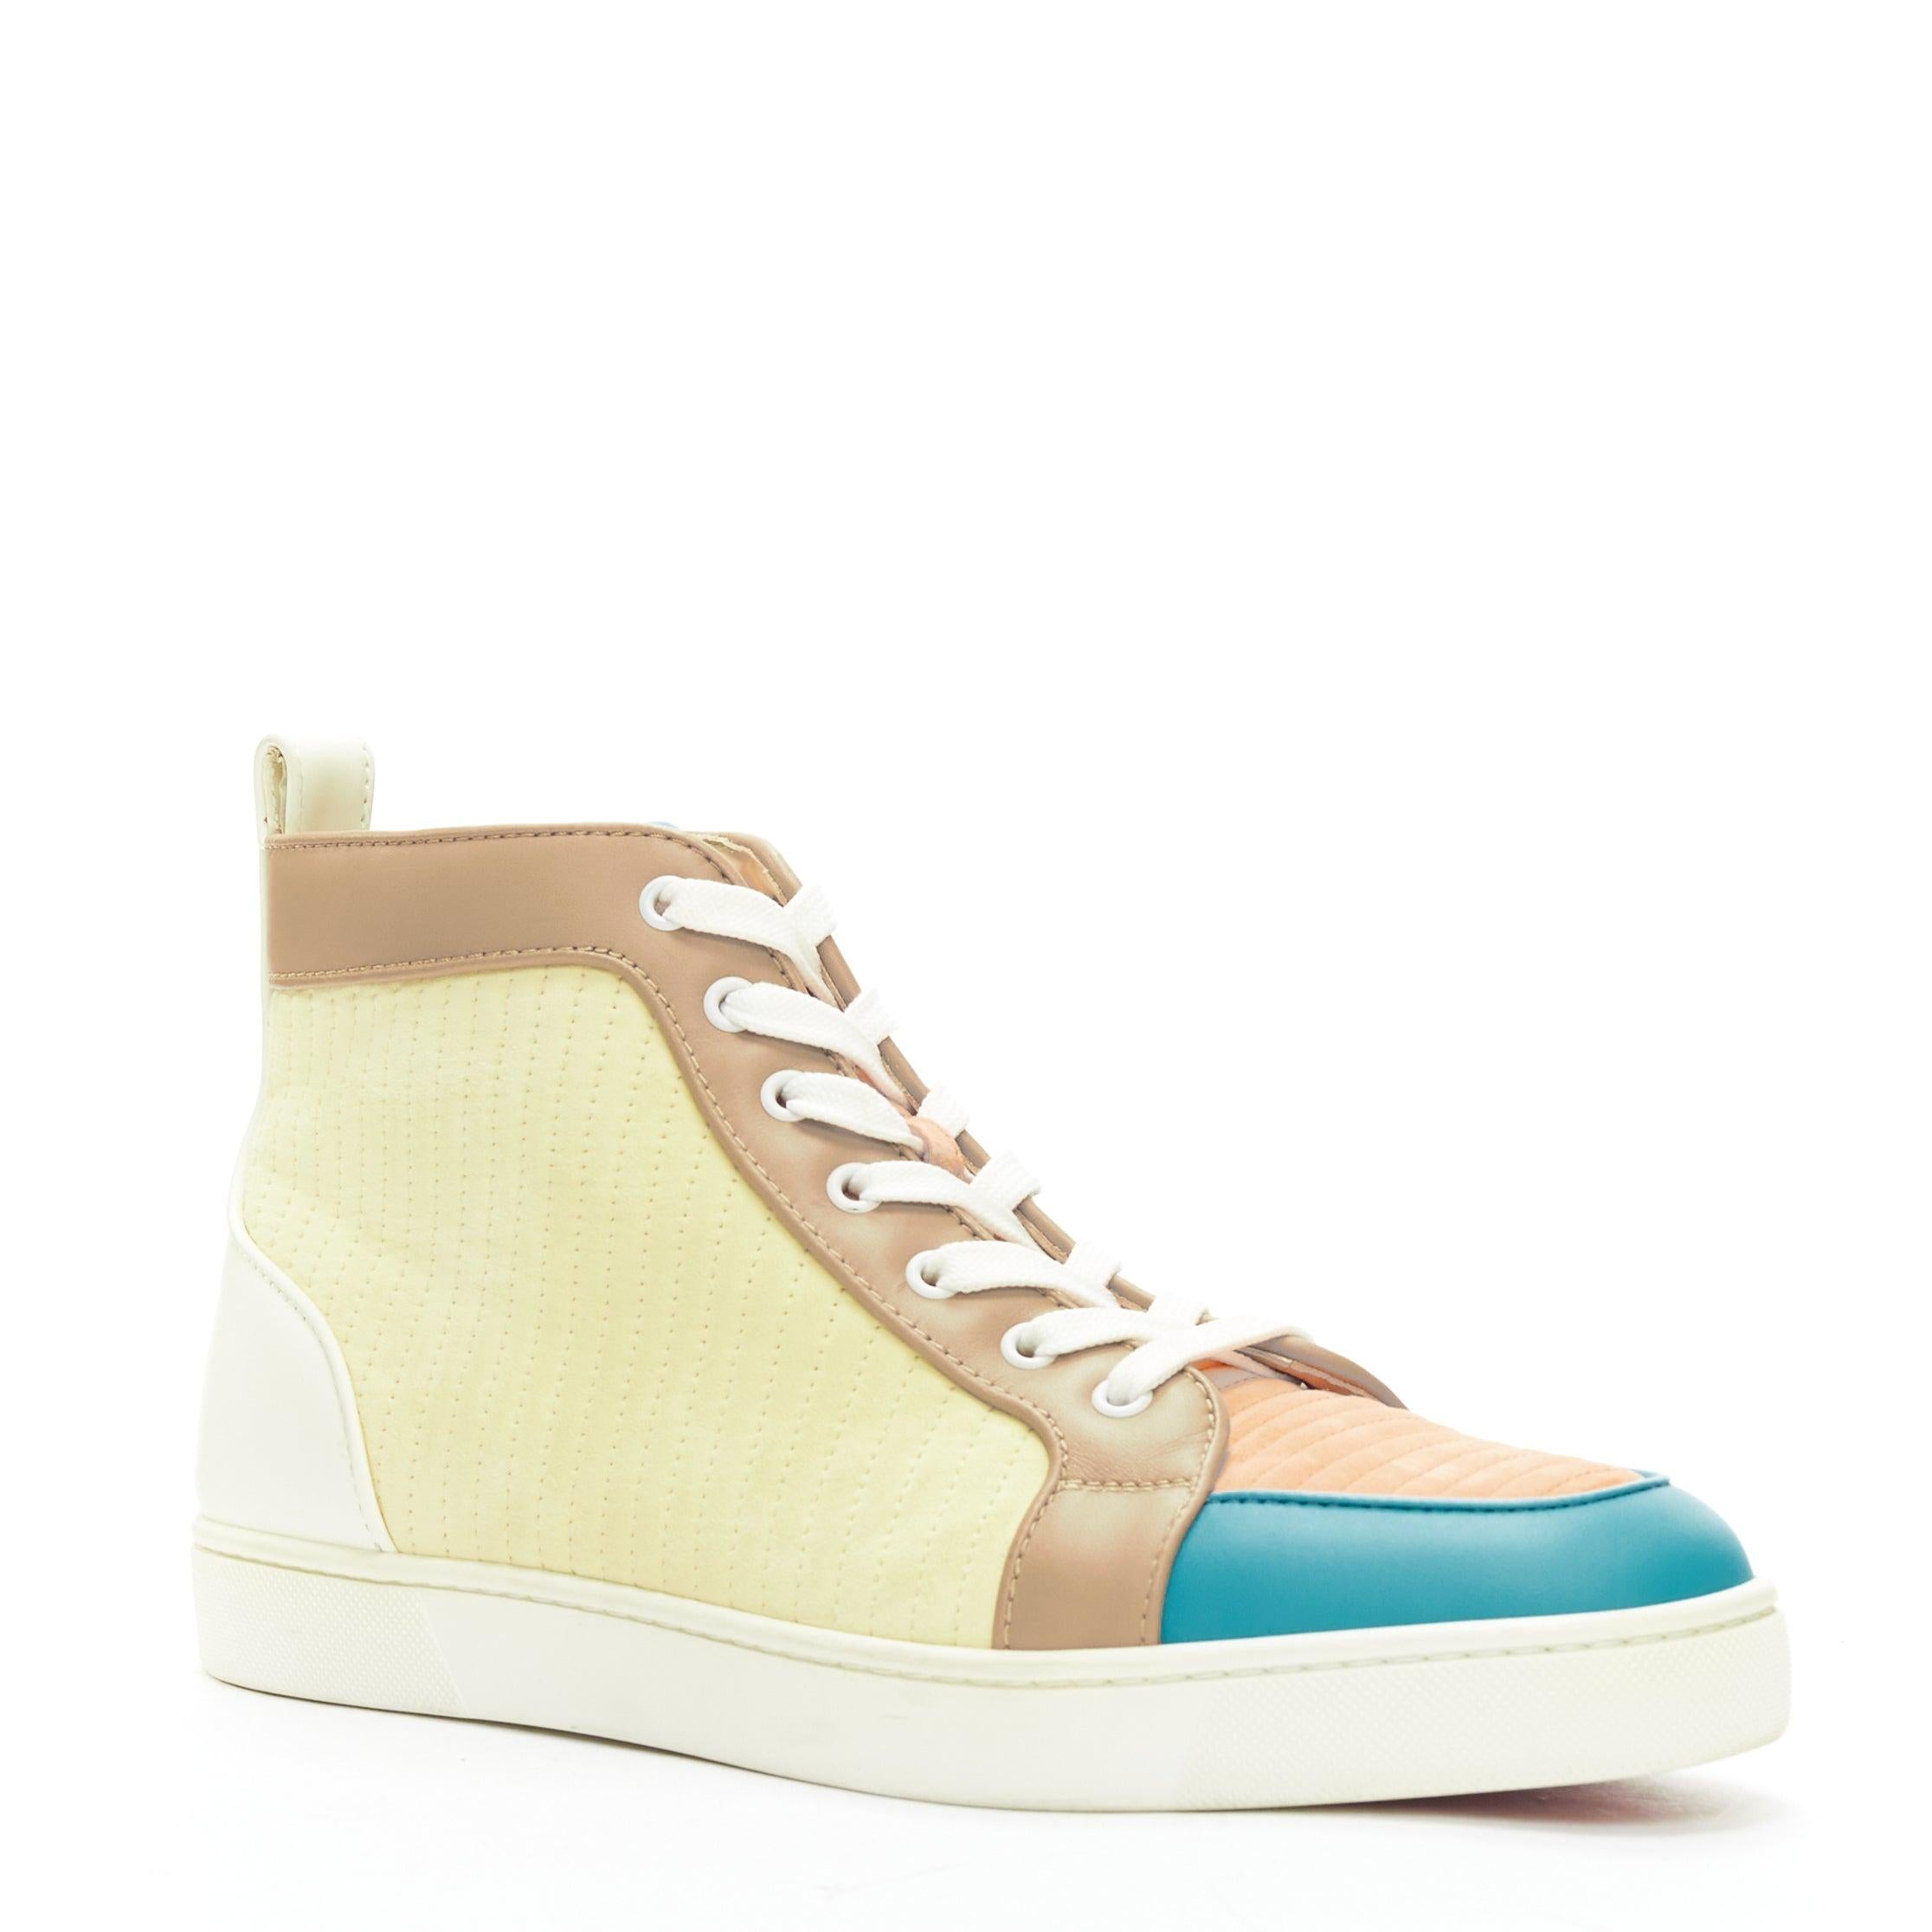 CHRISTIAN LOUBOUTIN Rantus Catach Orlato pastel suede high top sneaker EU42.5
Reference: JSLE/A00079
Brand: Christian Louboutin
Collection: Rantus Catach Orlato
Material: Suede, Leather
Color: Cream, Blue
Pattern: Solid
Closure: Lace Up
Lining: Nude